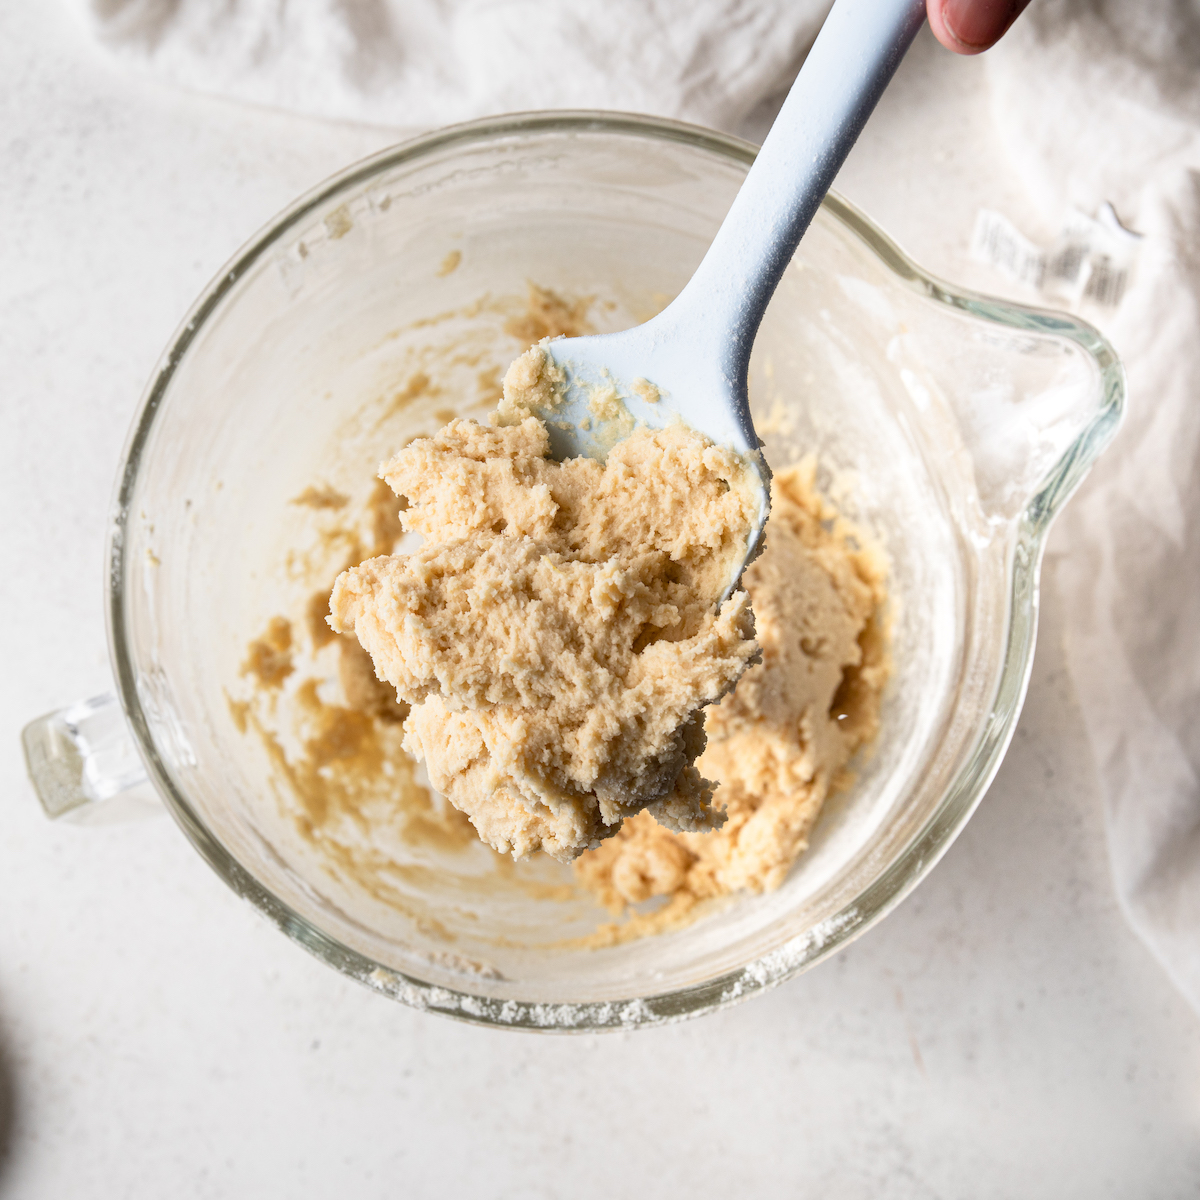 The perfect sugar cookie dough consistency.